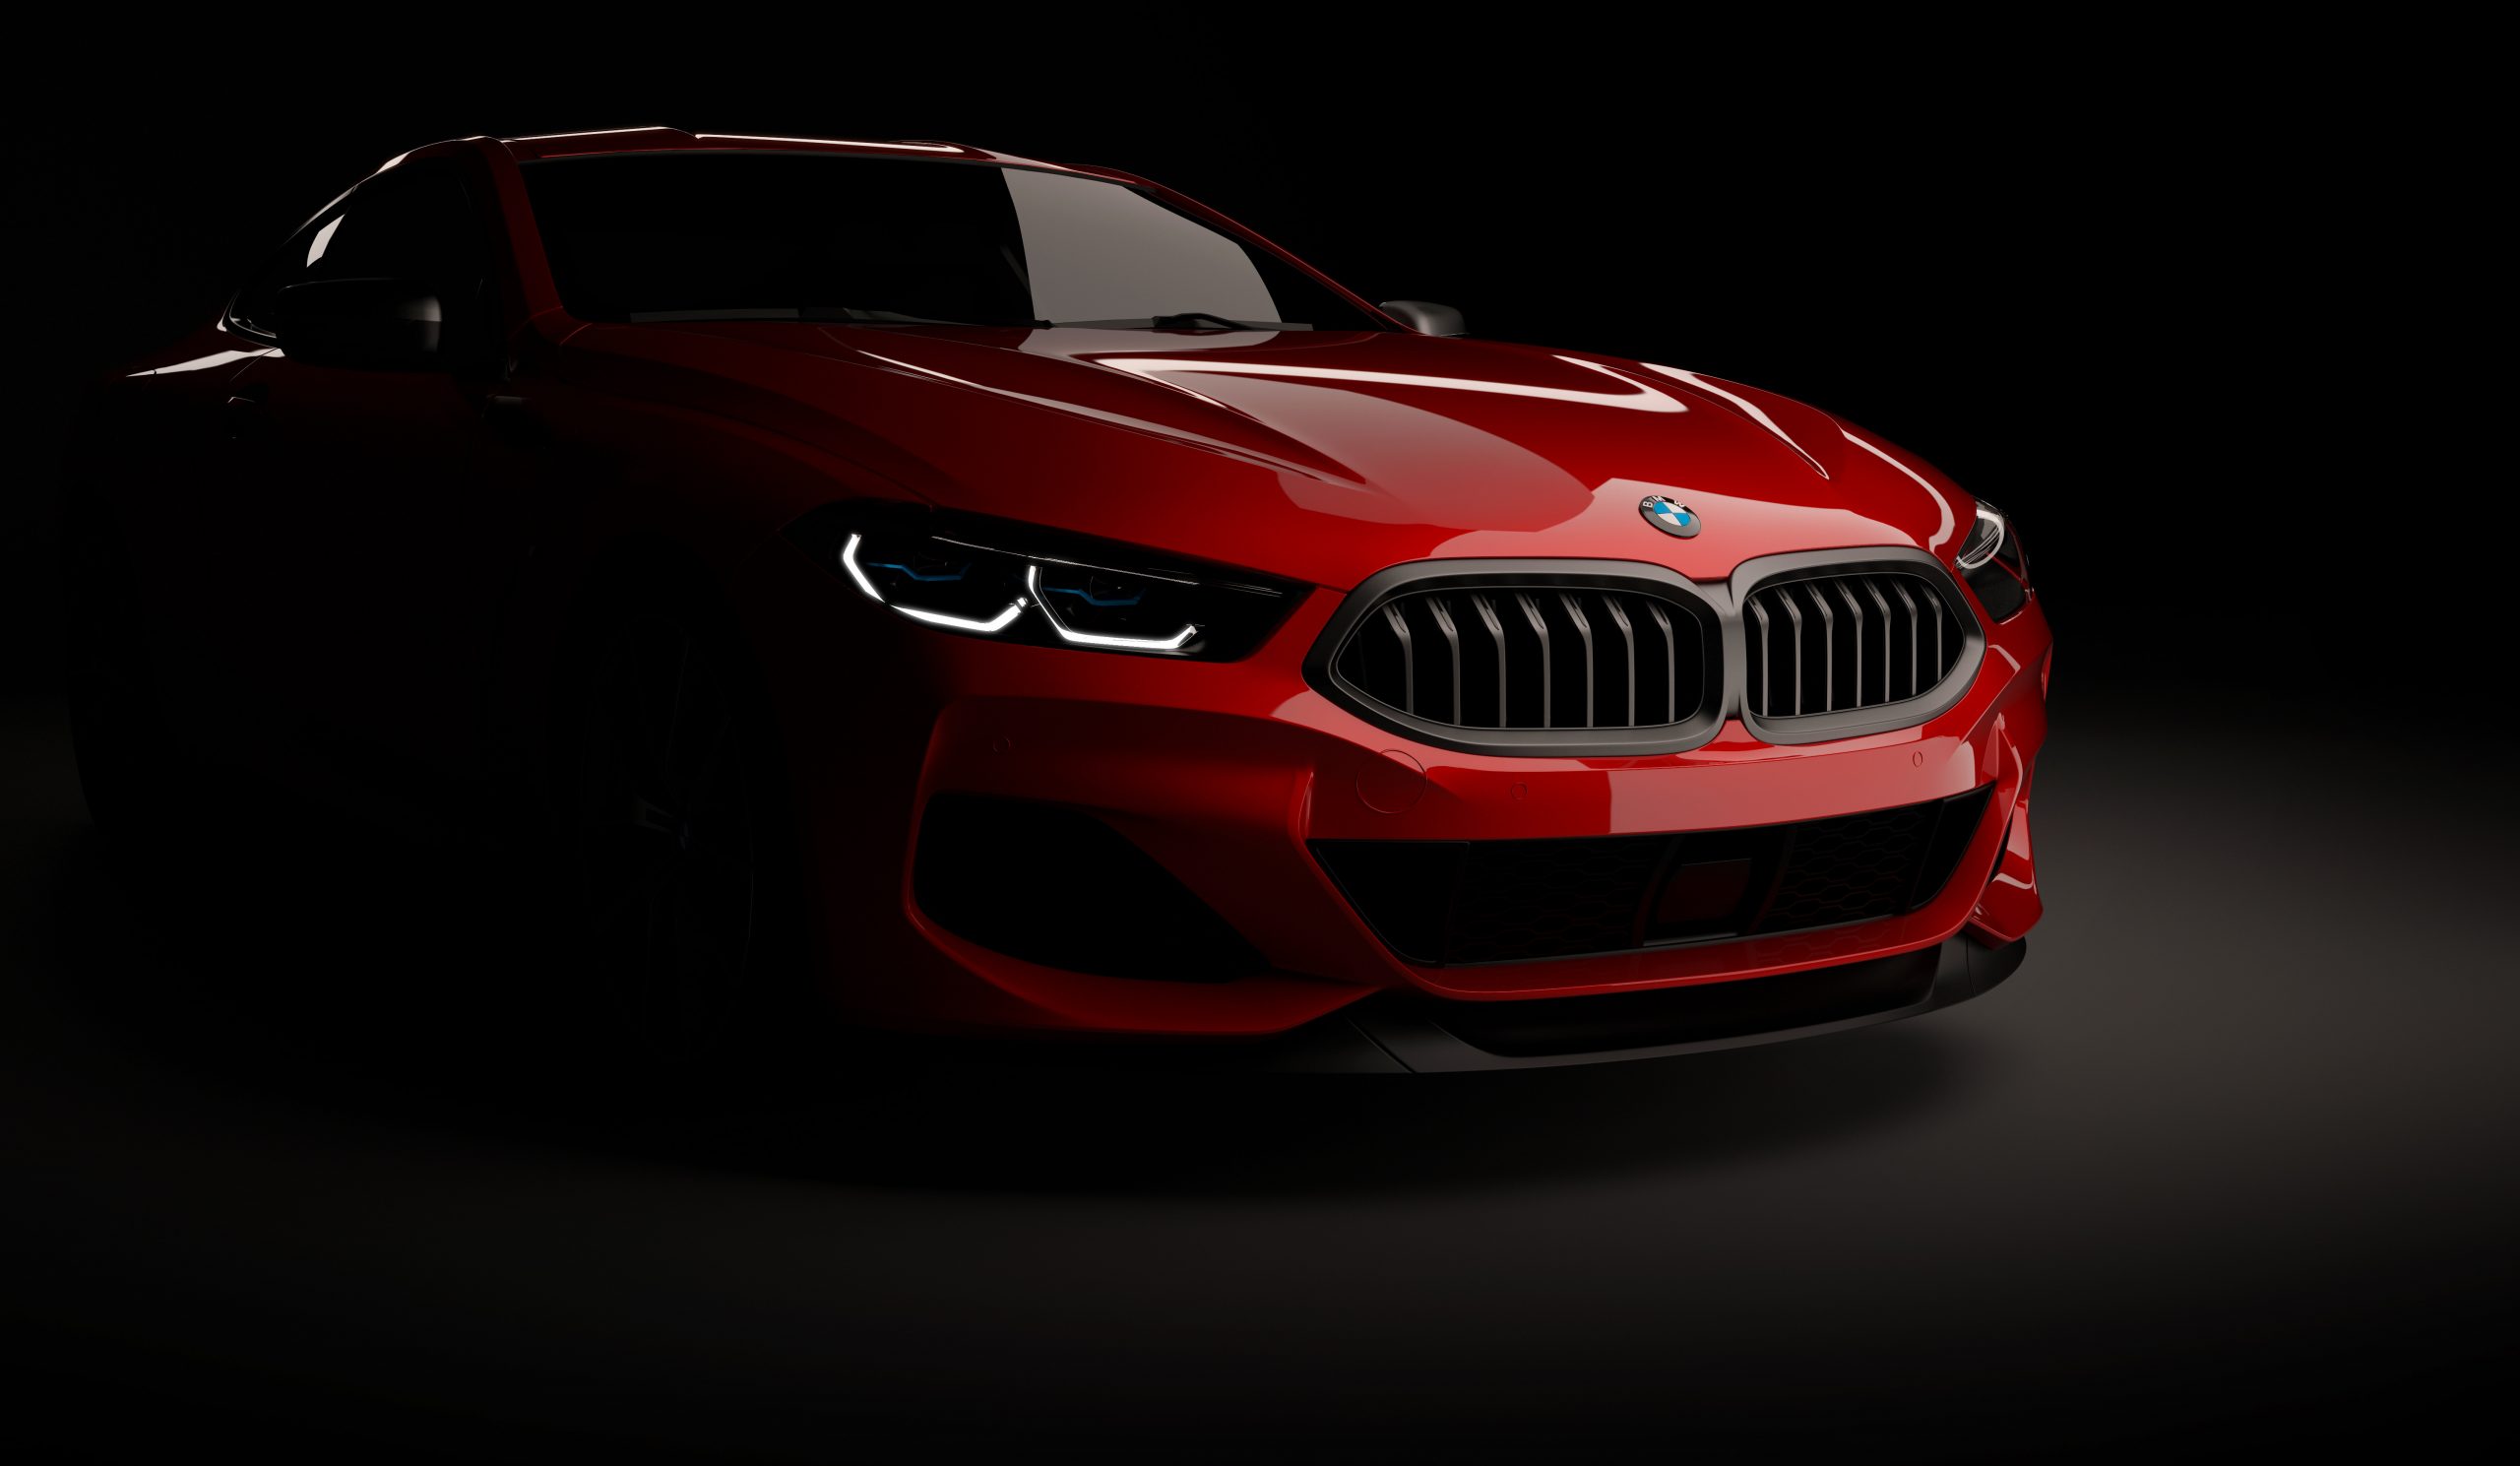 Image of a sleek-looking red BMW